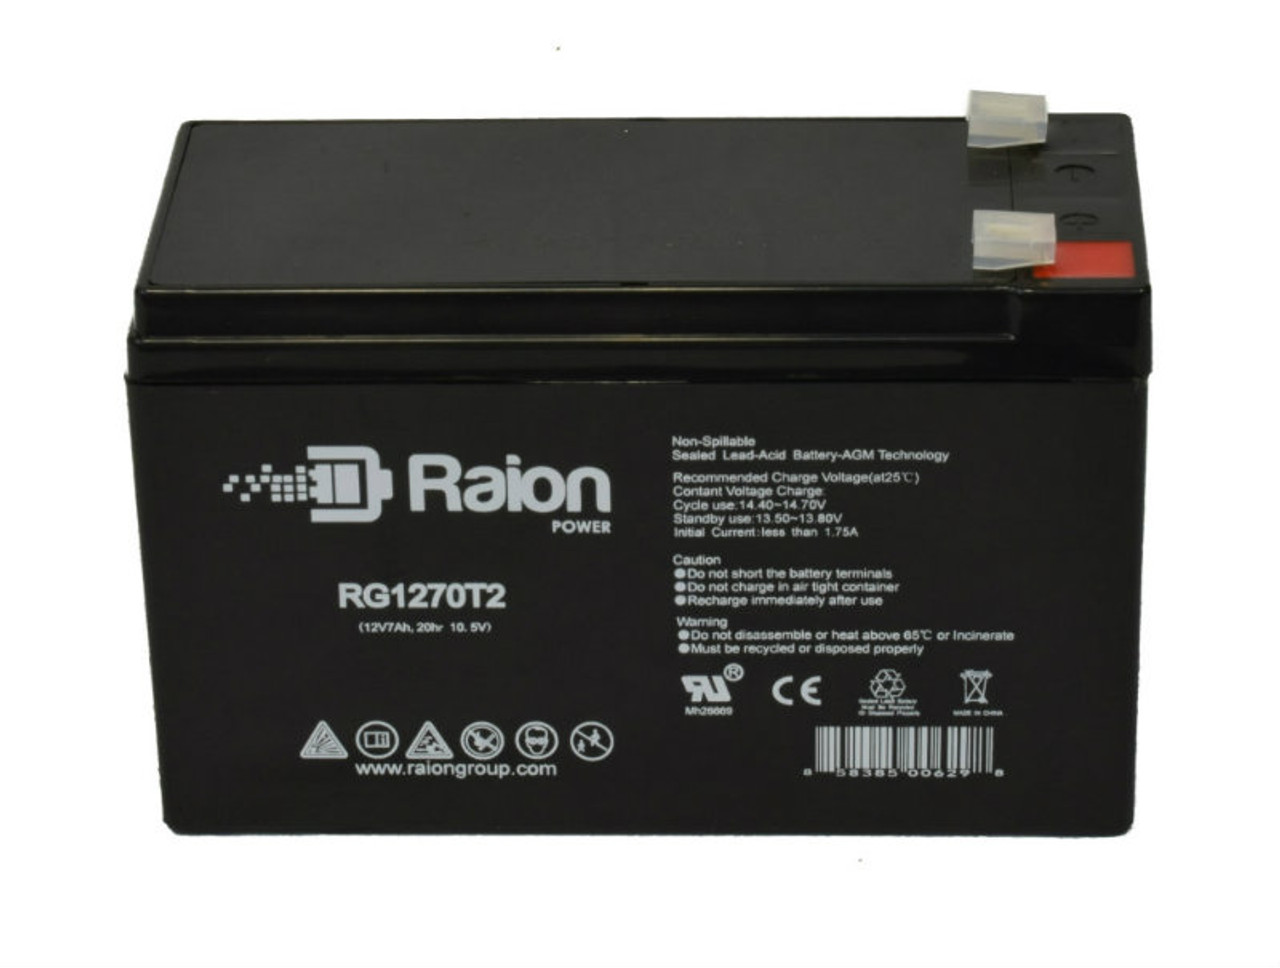 Raion Power RG1270T1 12V 7Ah Lead Acid Battery for North American Drager 2B Anesthesia Machine